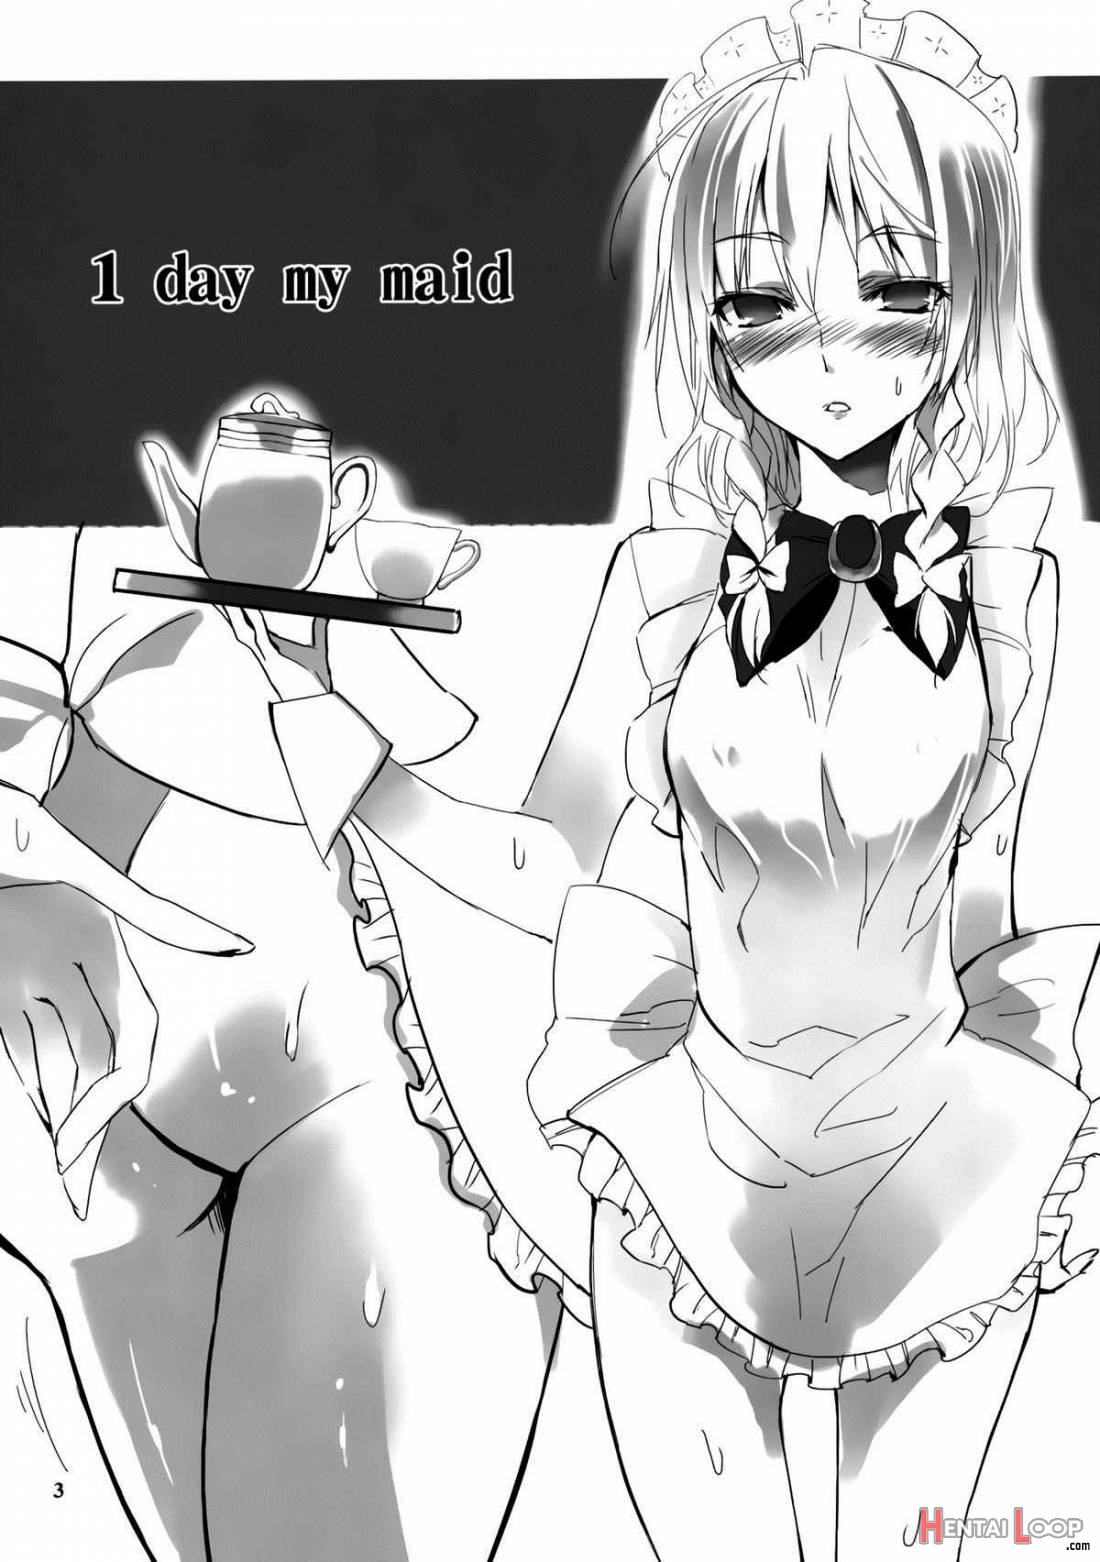 1 day my maid page 2